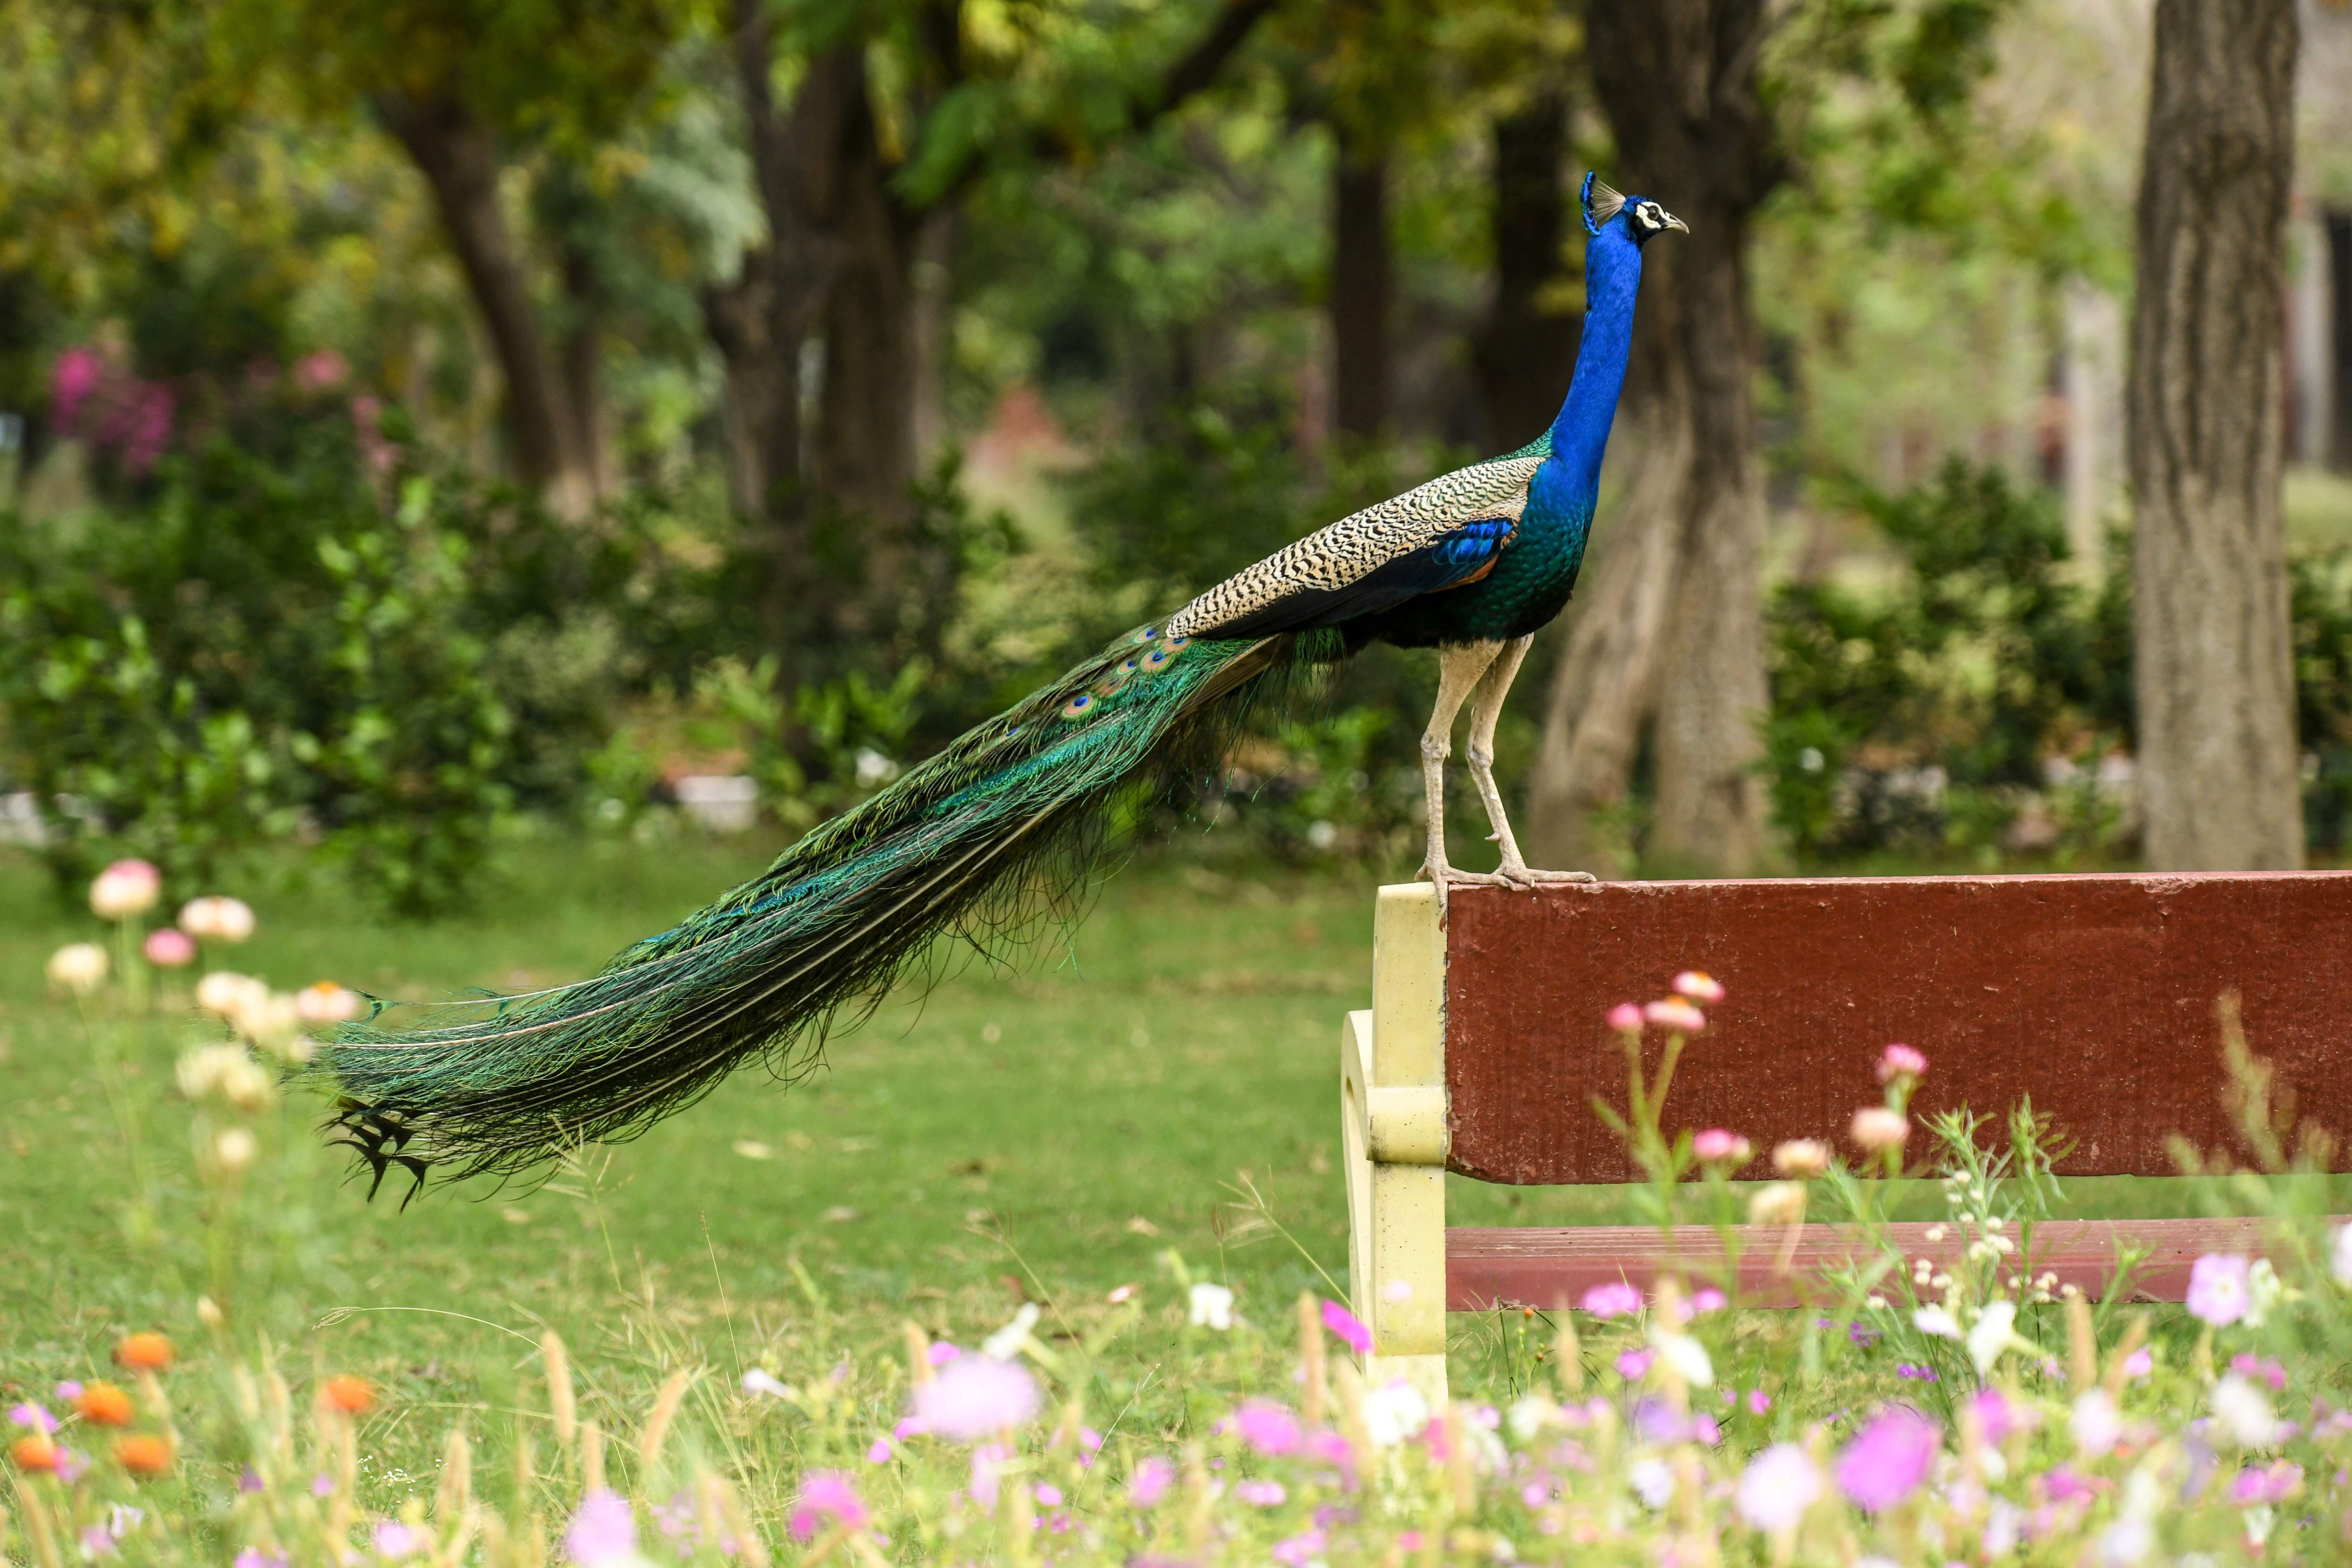 Peacock standing on a bench in a garden